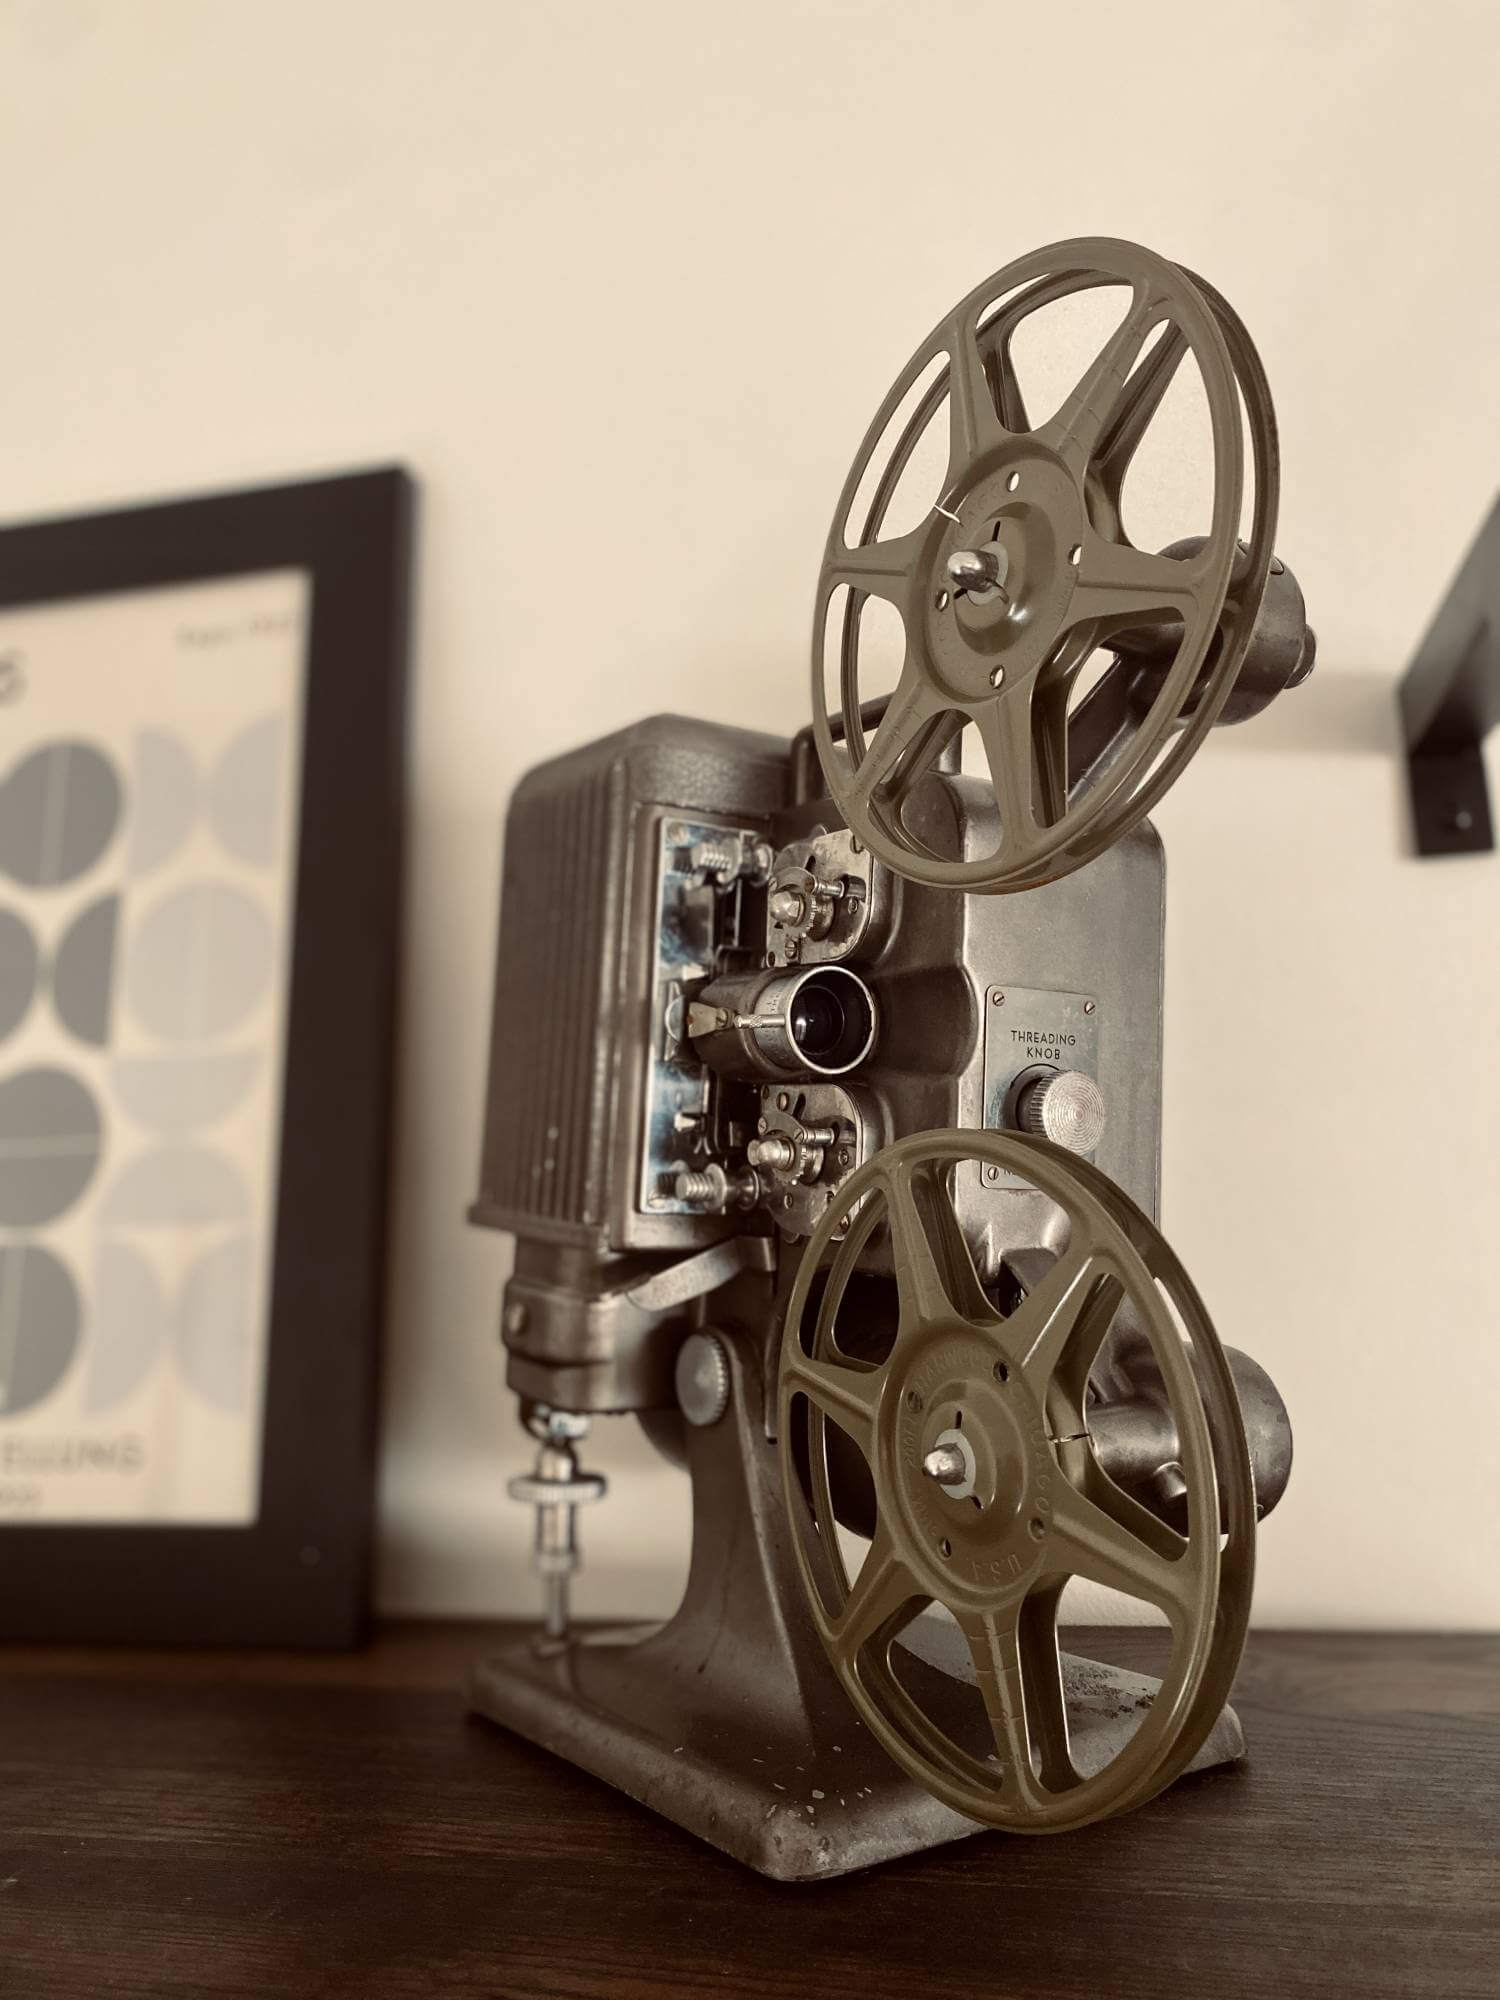 The vintage movie projector